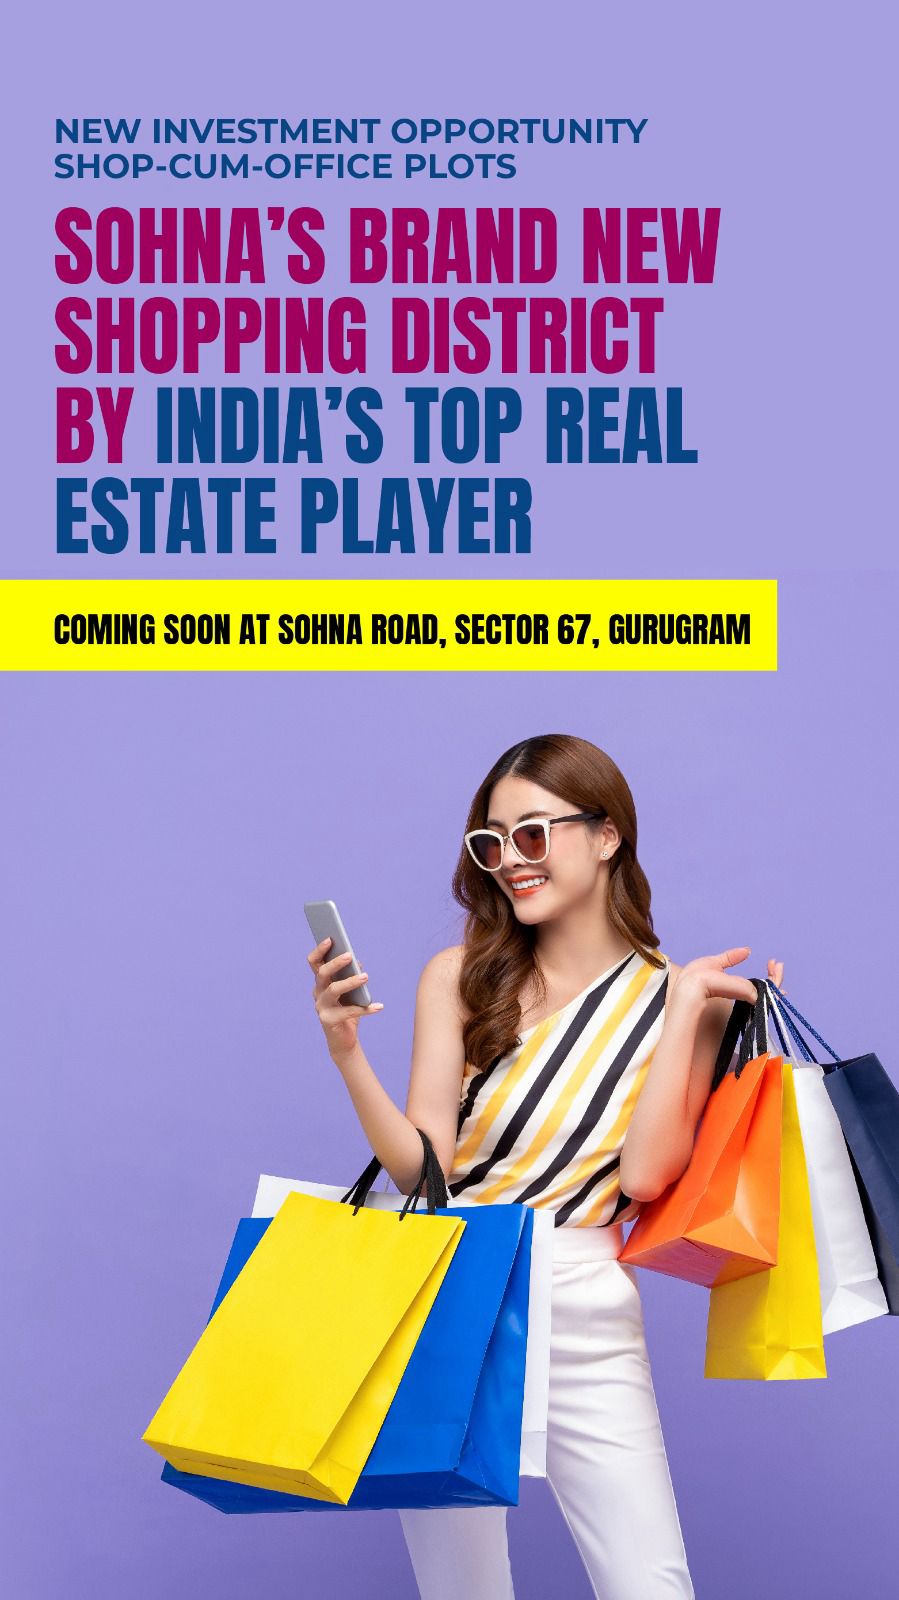 Revolutionizing Retail: The Launch of Sohna's New Shopping District on Sohna Road, Sector 67, Gurugram Update